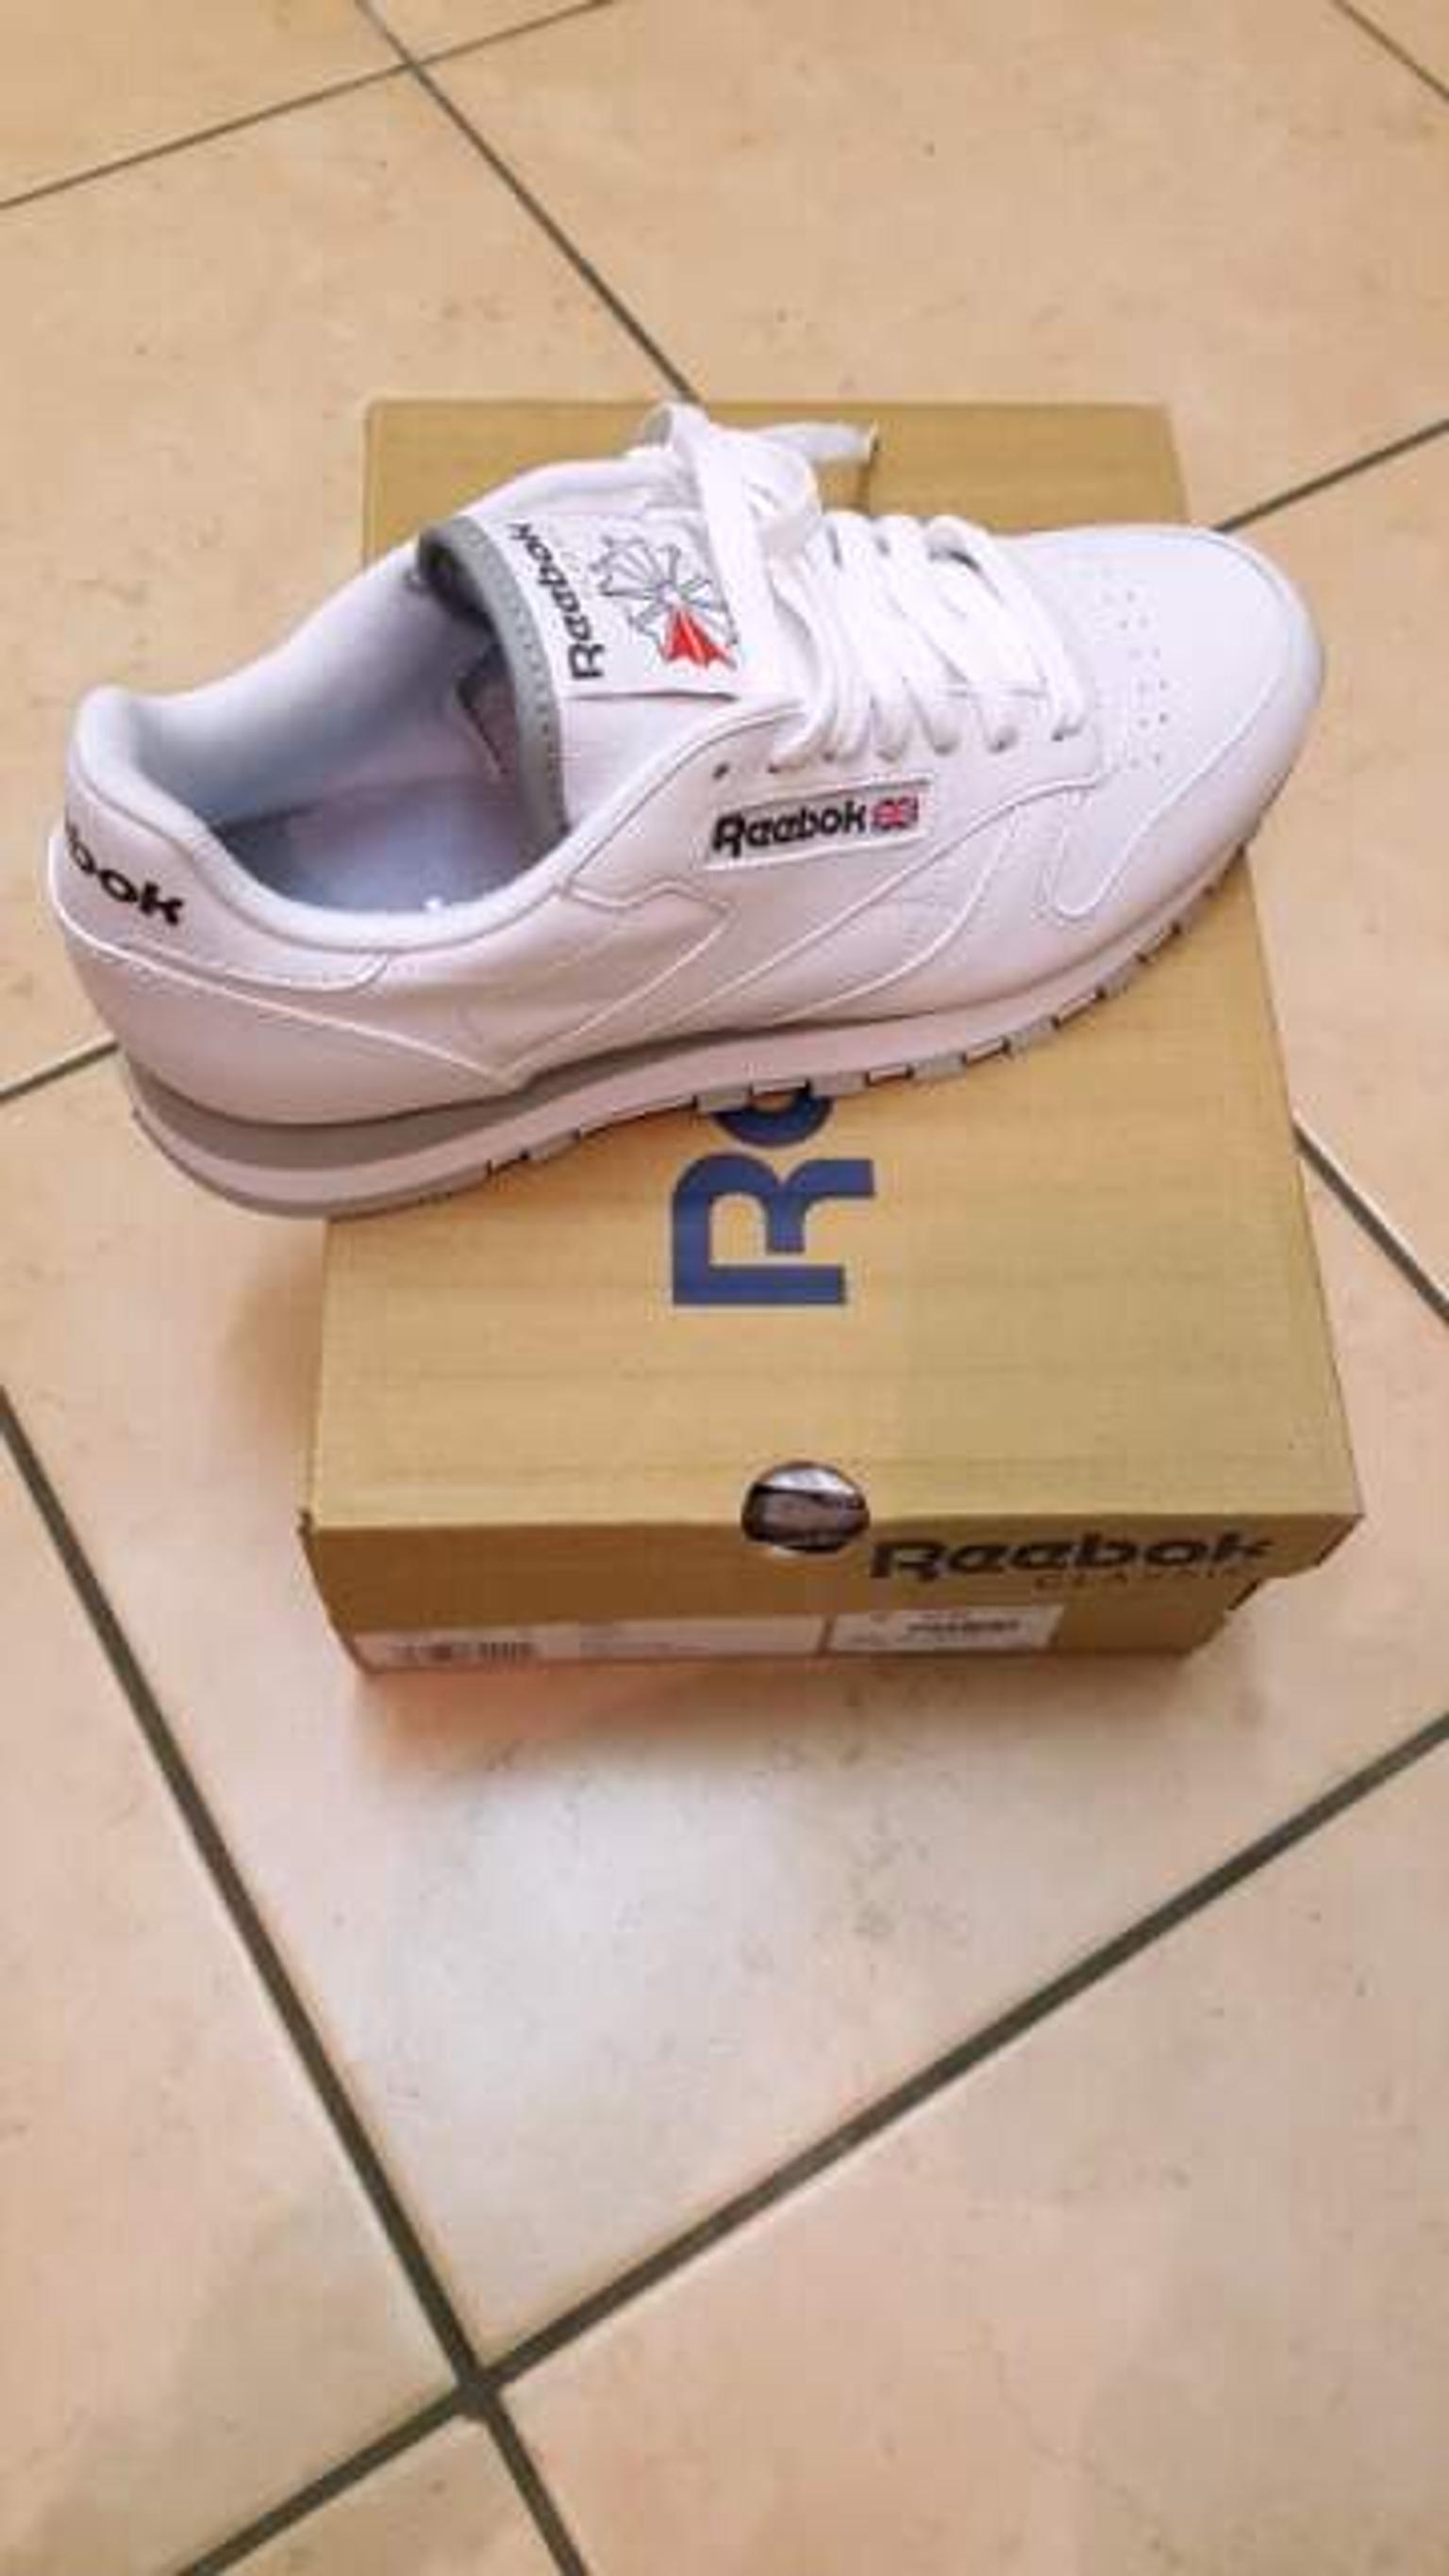 Reebok classic leather scarpe free time uomo in 63813 Monte Urano for  €50.00 for sale | Shpock